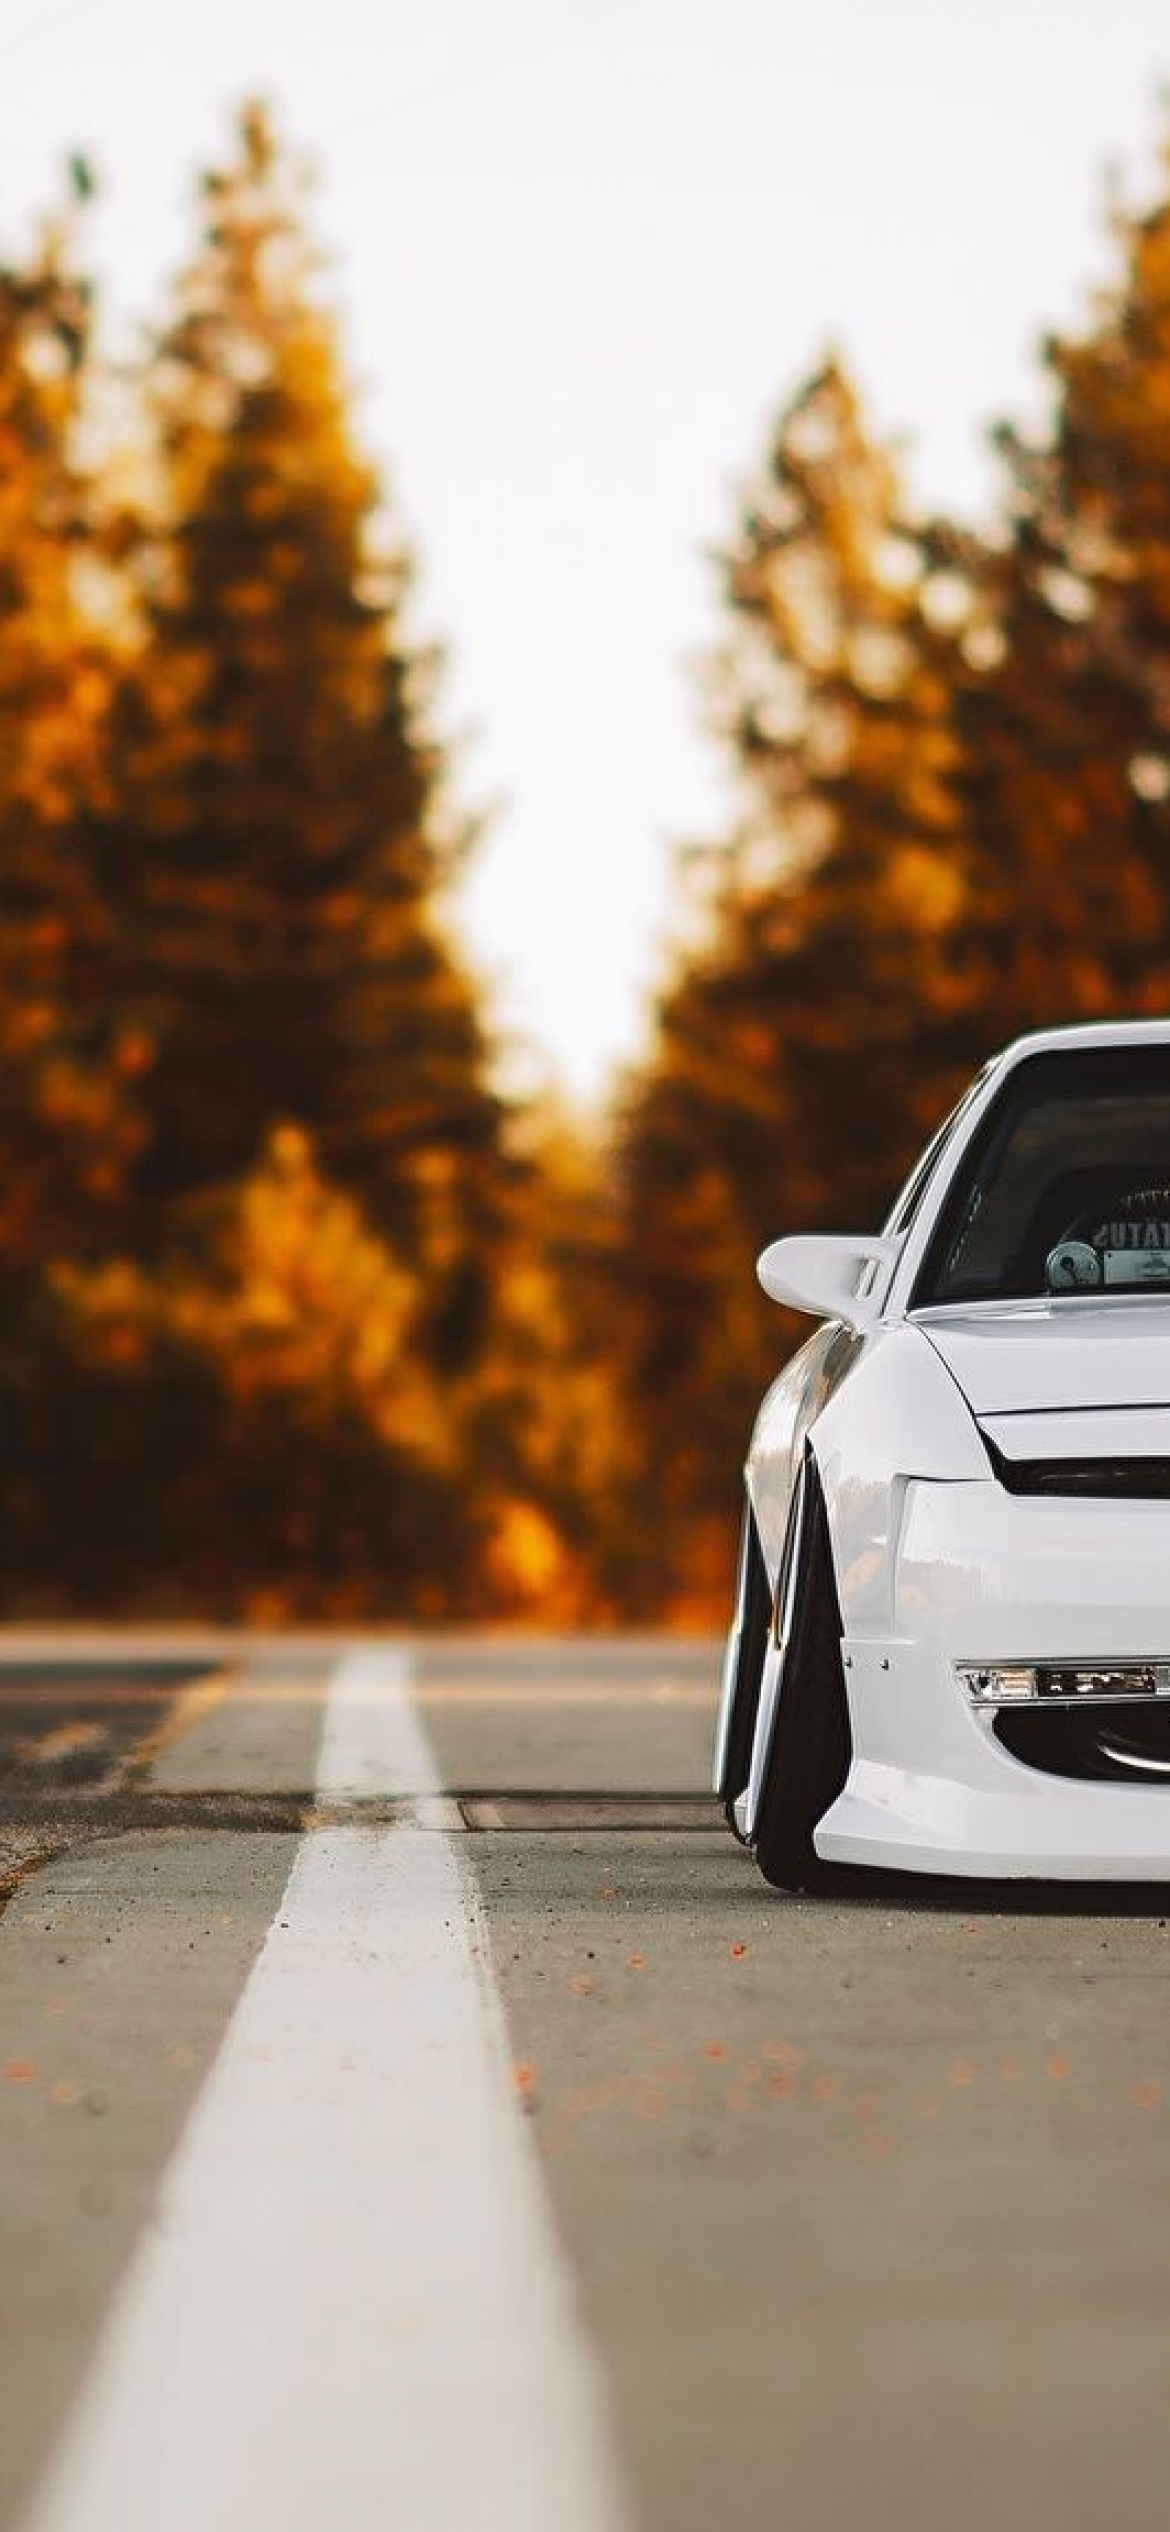 240sx wallpaper by NaturalAspect  Download on ZEDGE  ed32